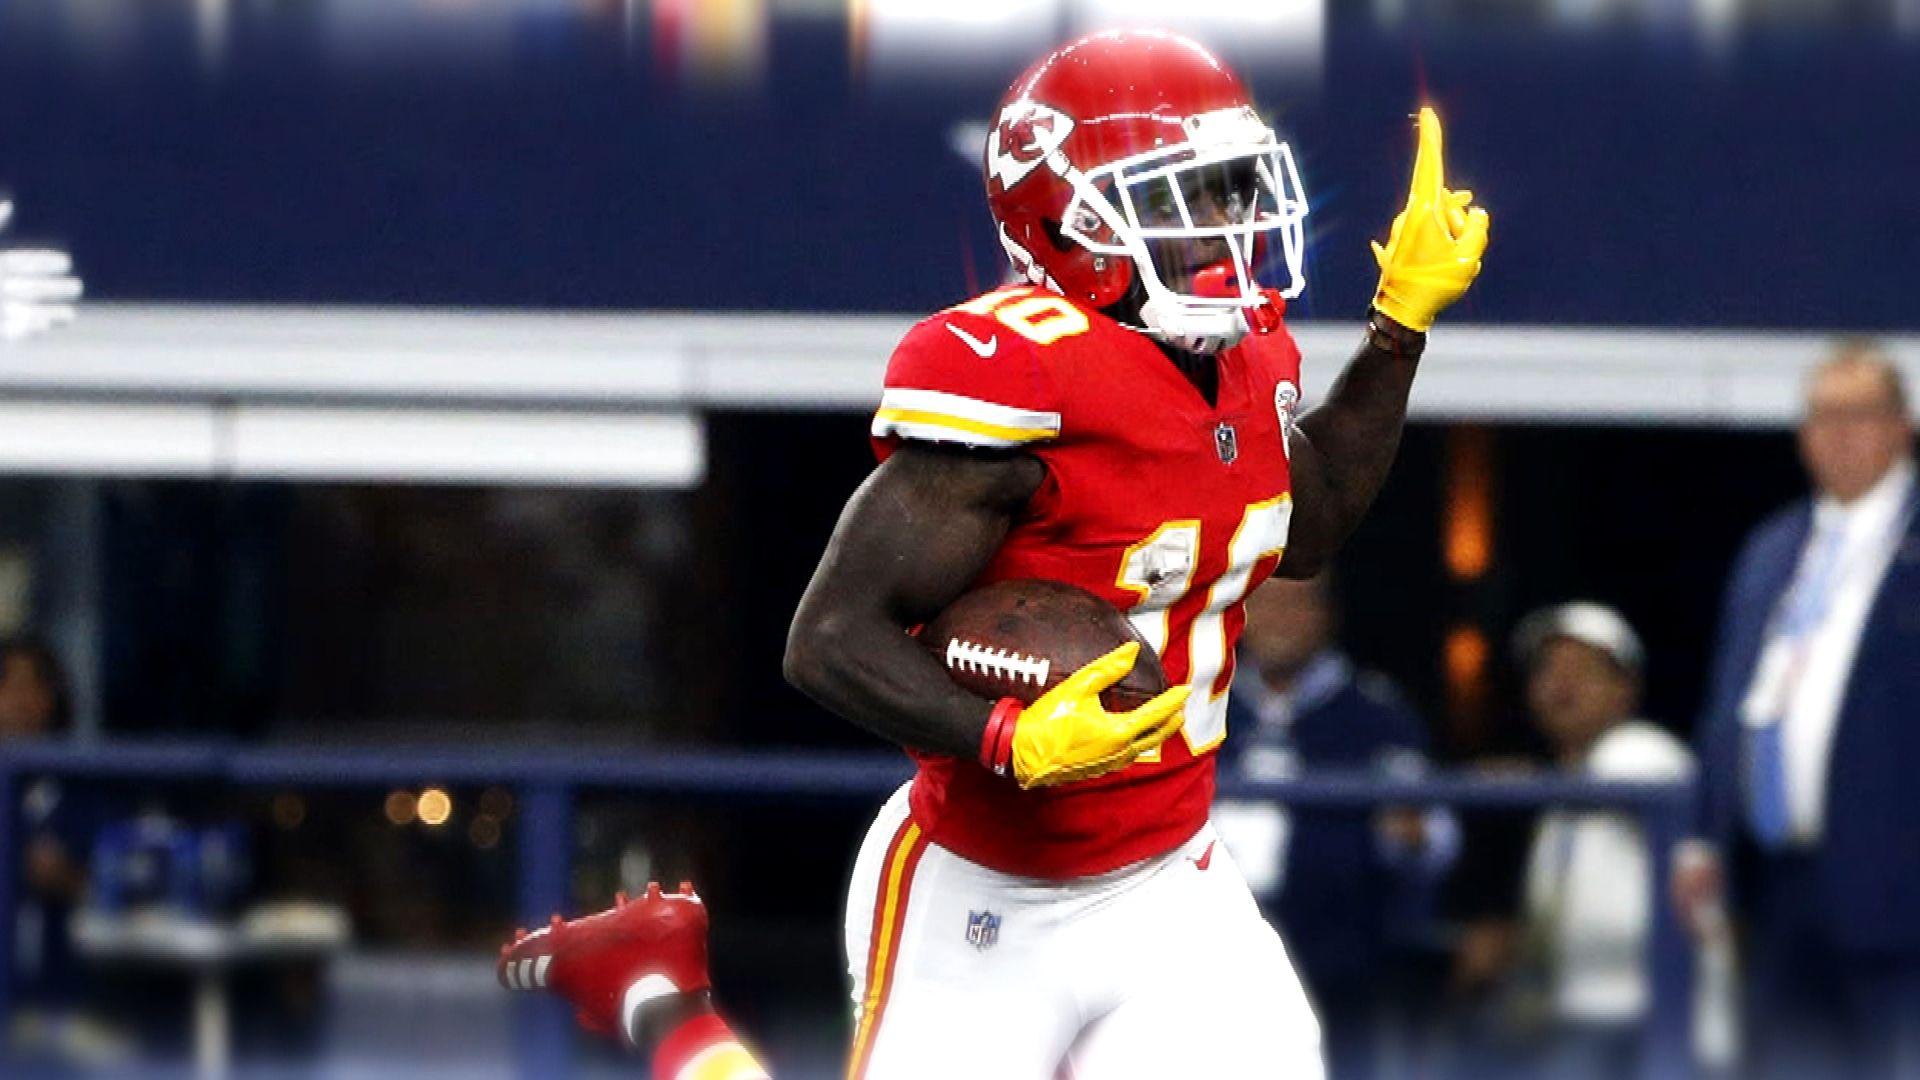 Chiefs WR Tyreek Hill loves to show off his speed to defenders